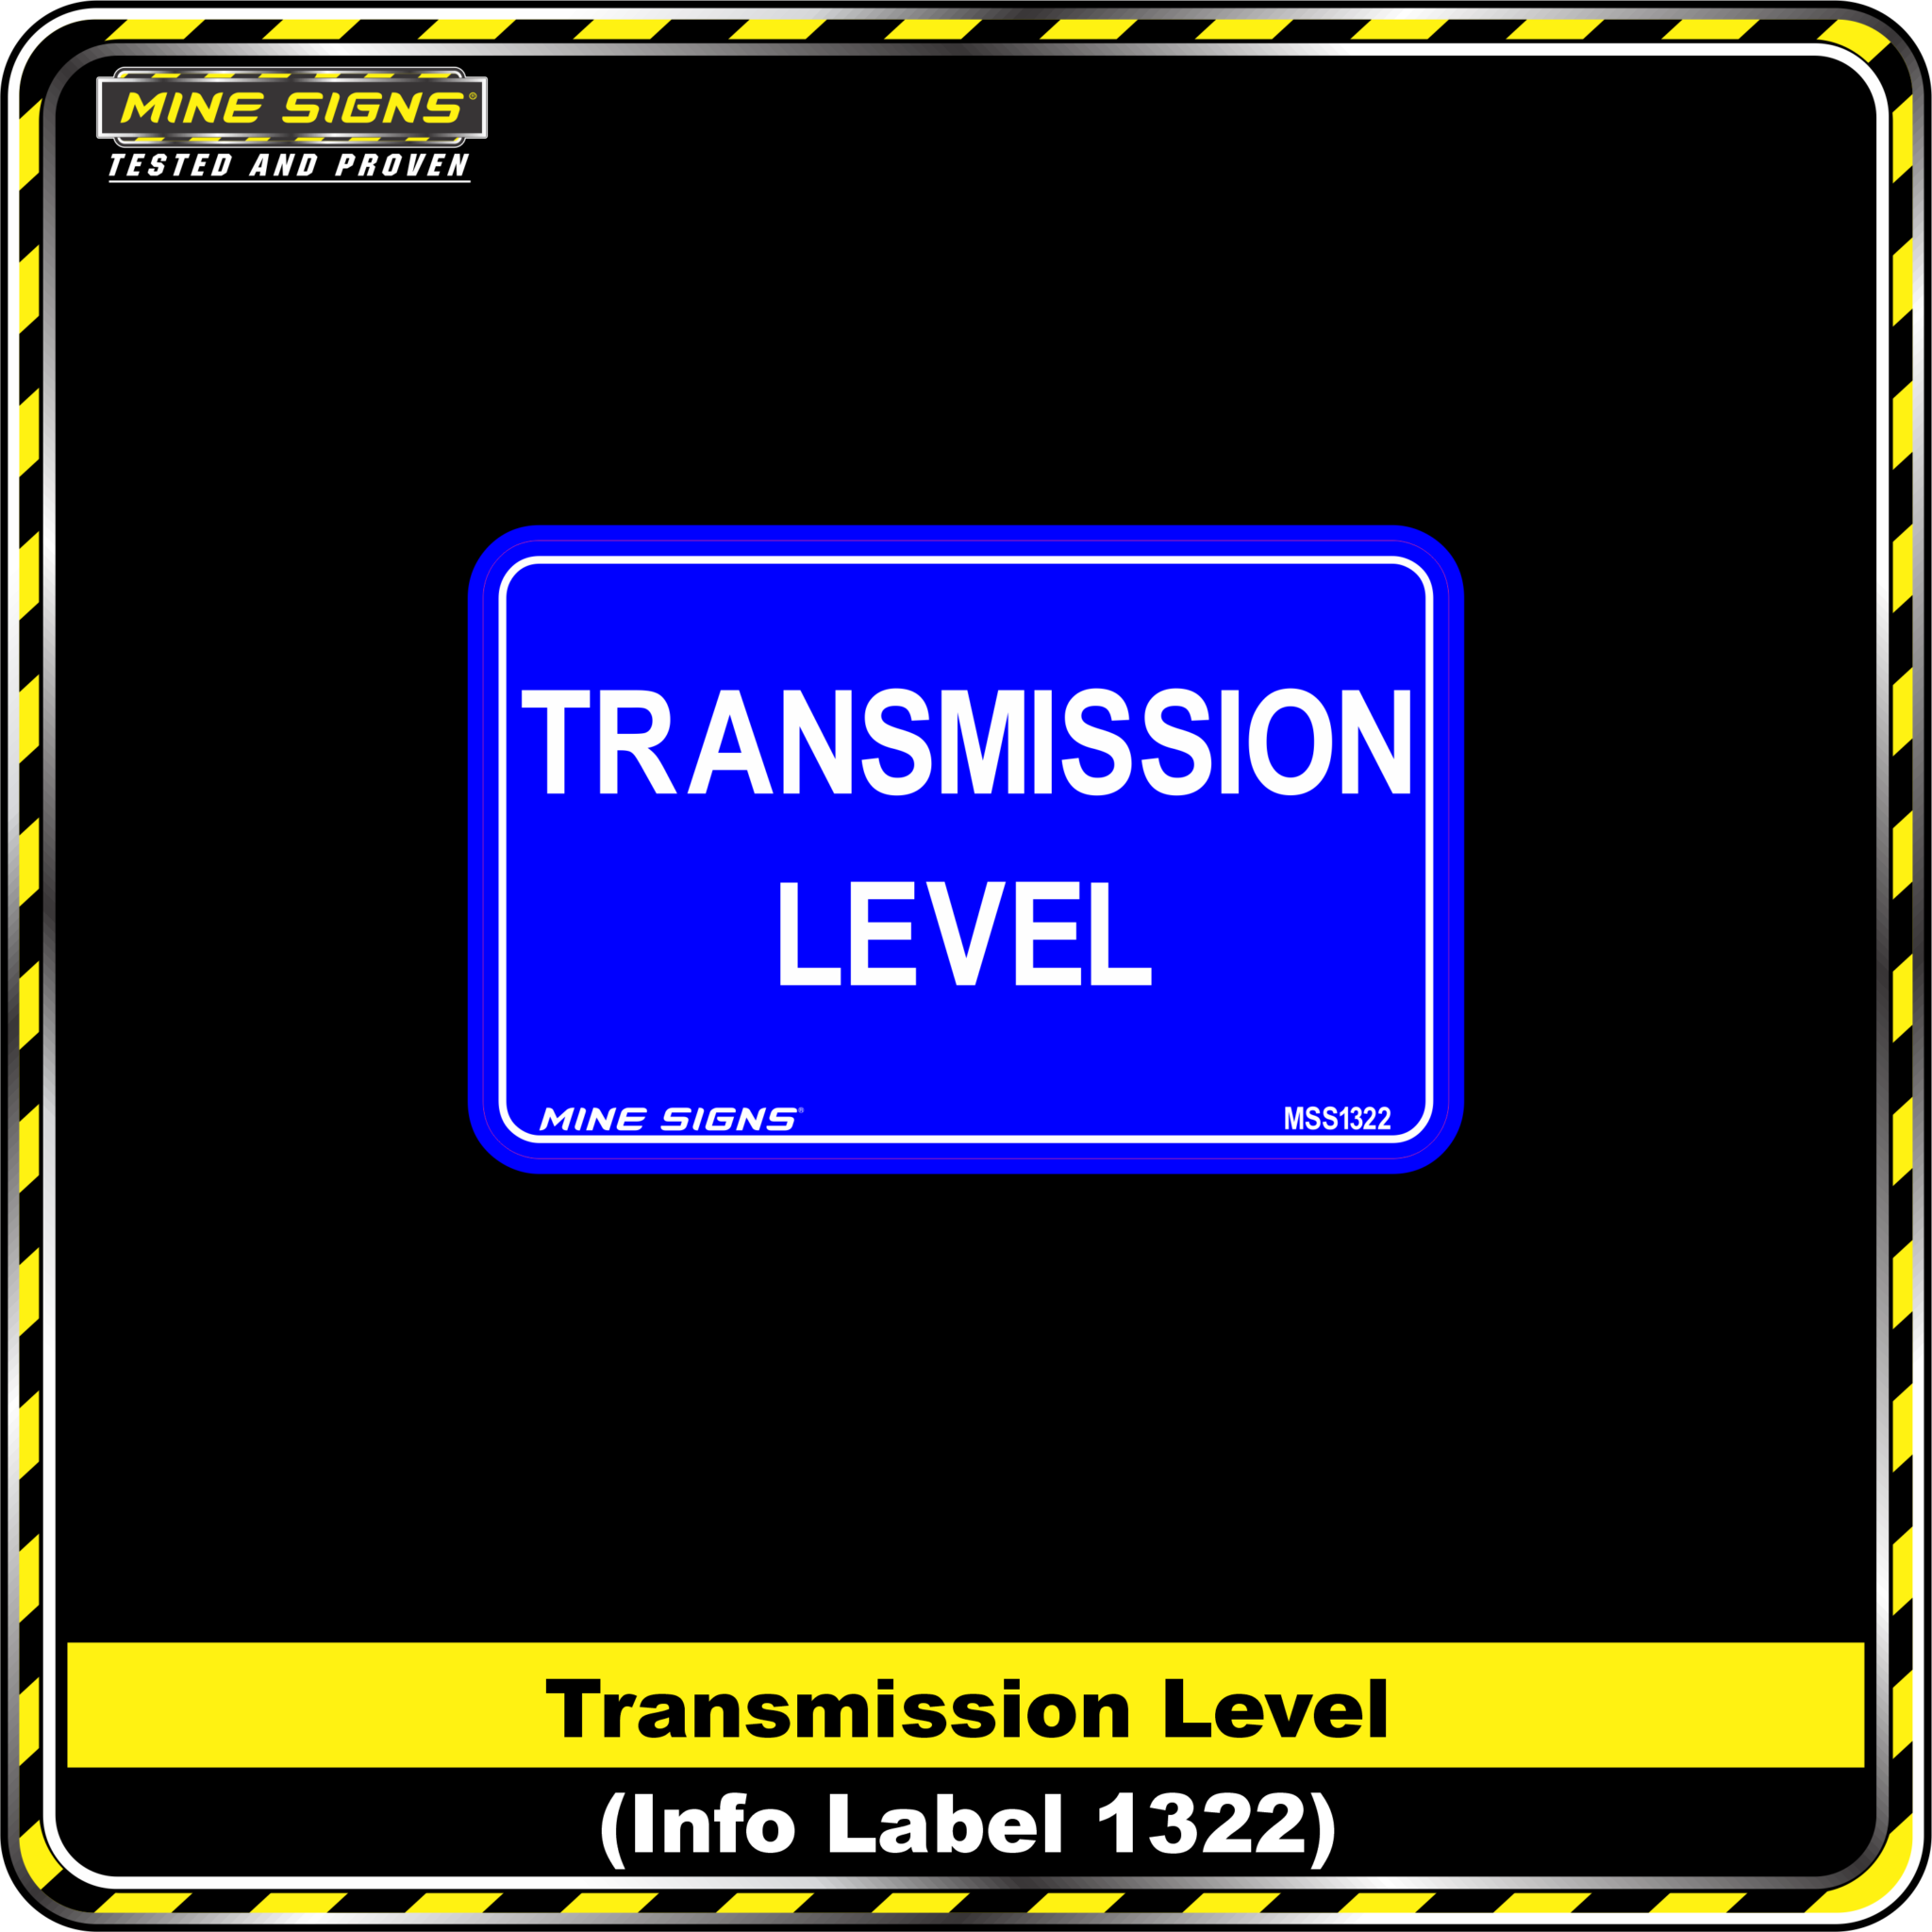 MS - Product Background - Safety Signs - Transmission Level - 1322